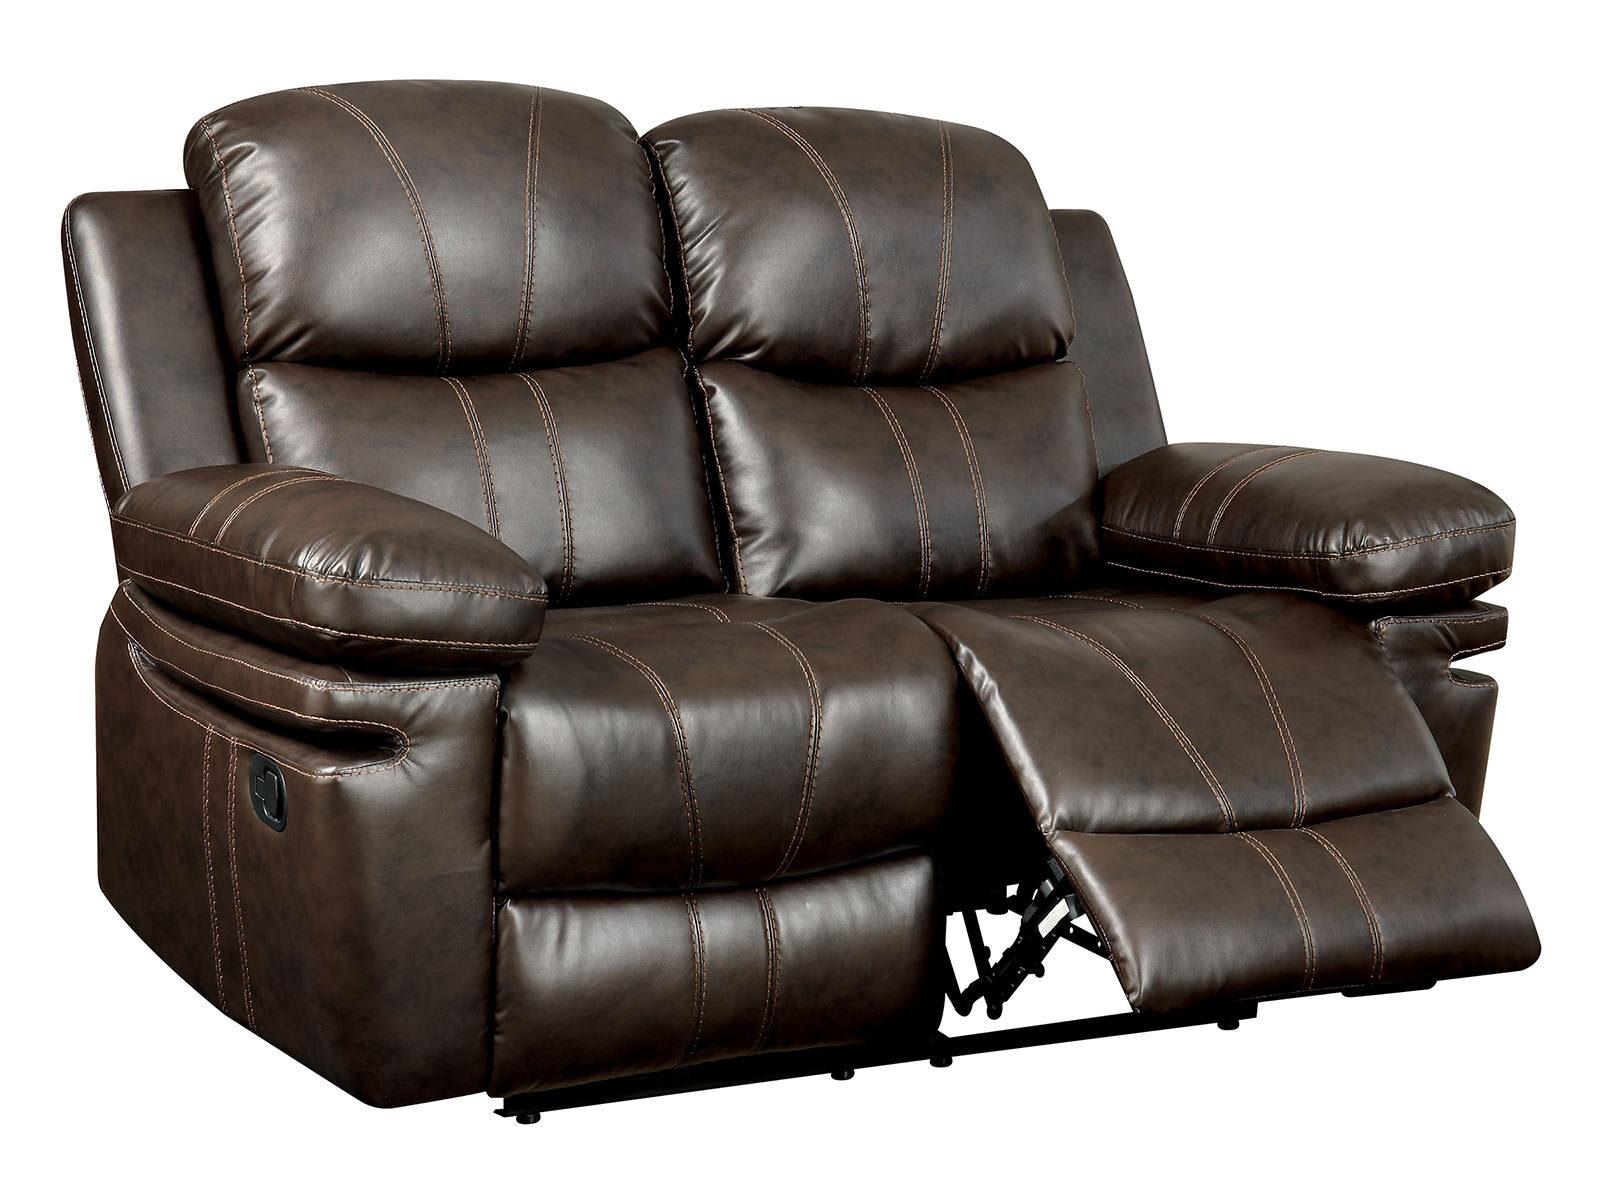 

    
Furniture of America CM6992-3PC Listowel Recliner Sofa Loveseat and Chair Brown CM6992-3PC
